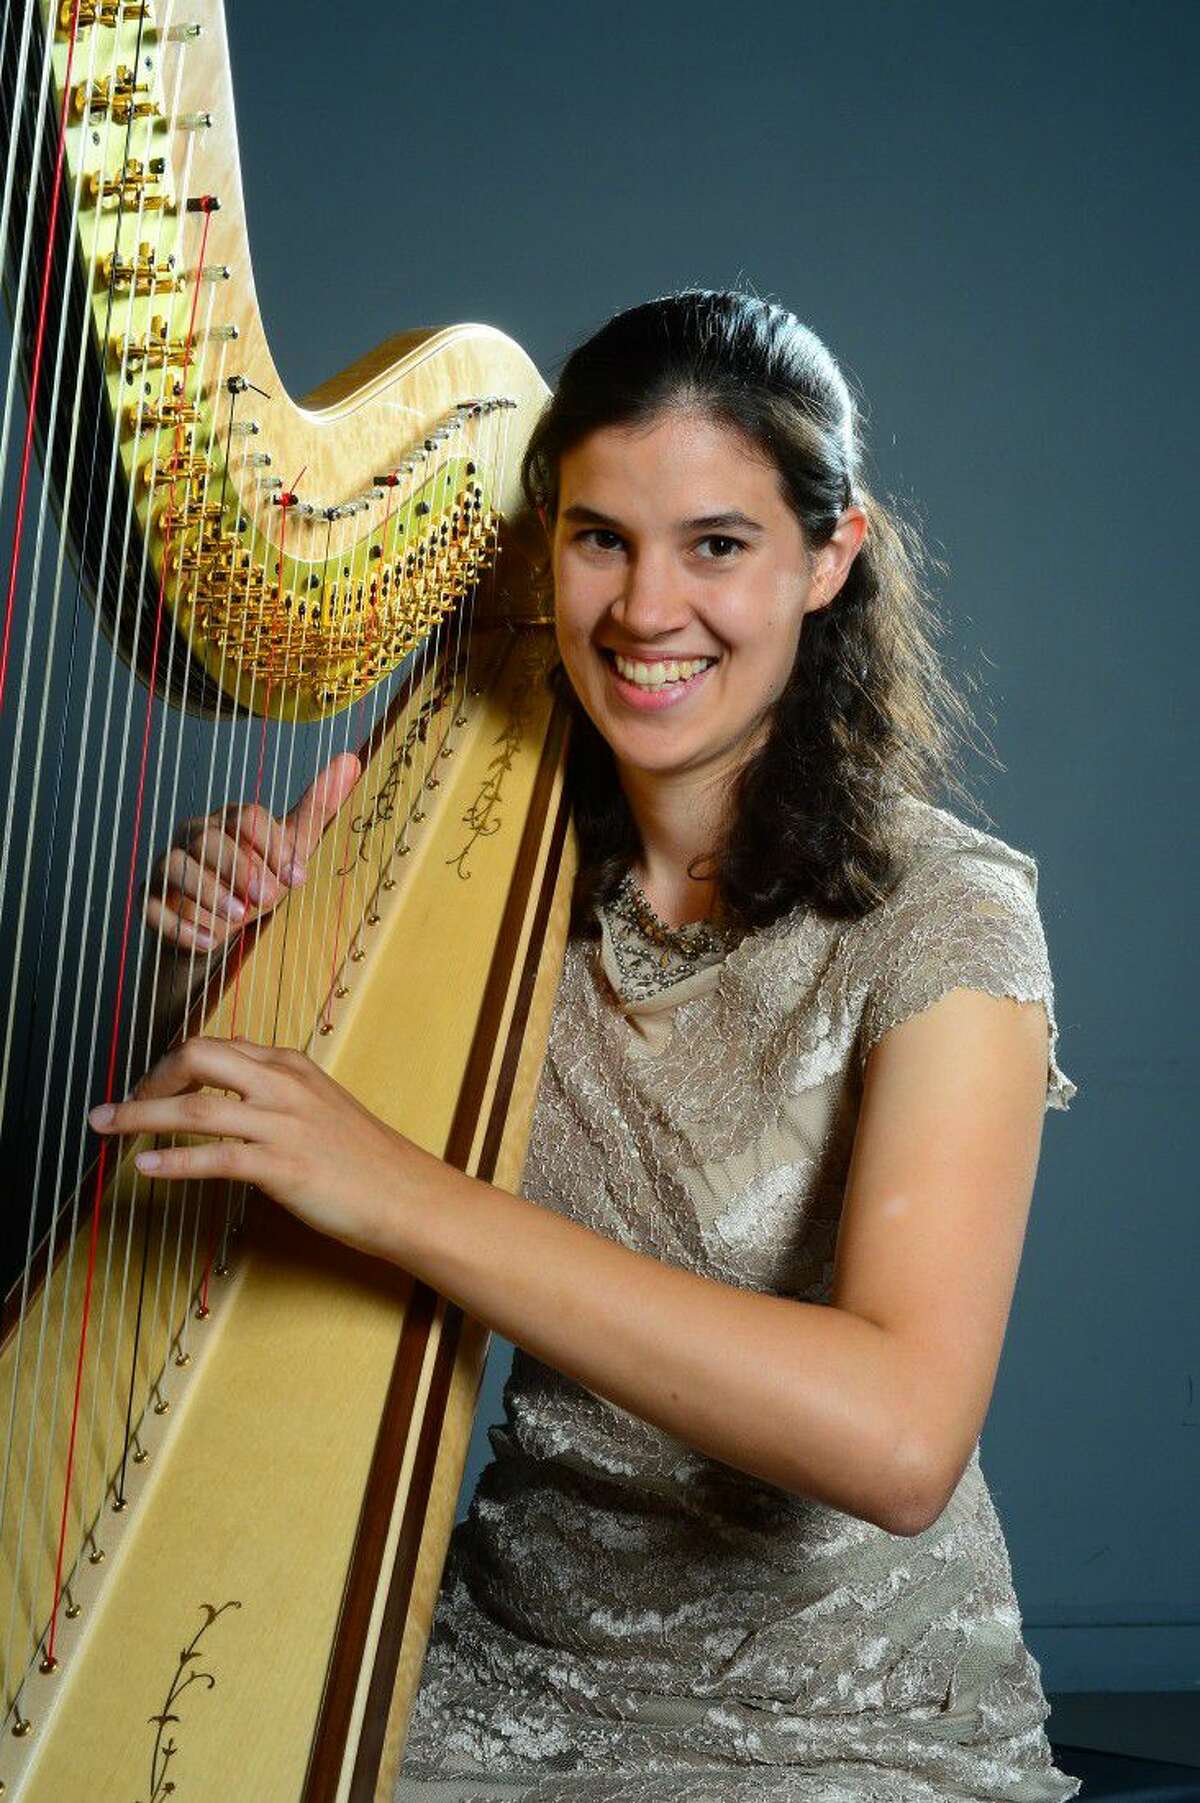 A free solo harp concert featuring Rachel Knight, Doctor of Musical Arts Student at the University of Tuscon, will be presented at the Humble Methodist Church, 800 E. Main St. Friday, July 22 at 7 p.m.